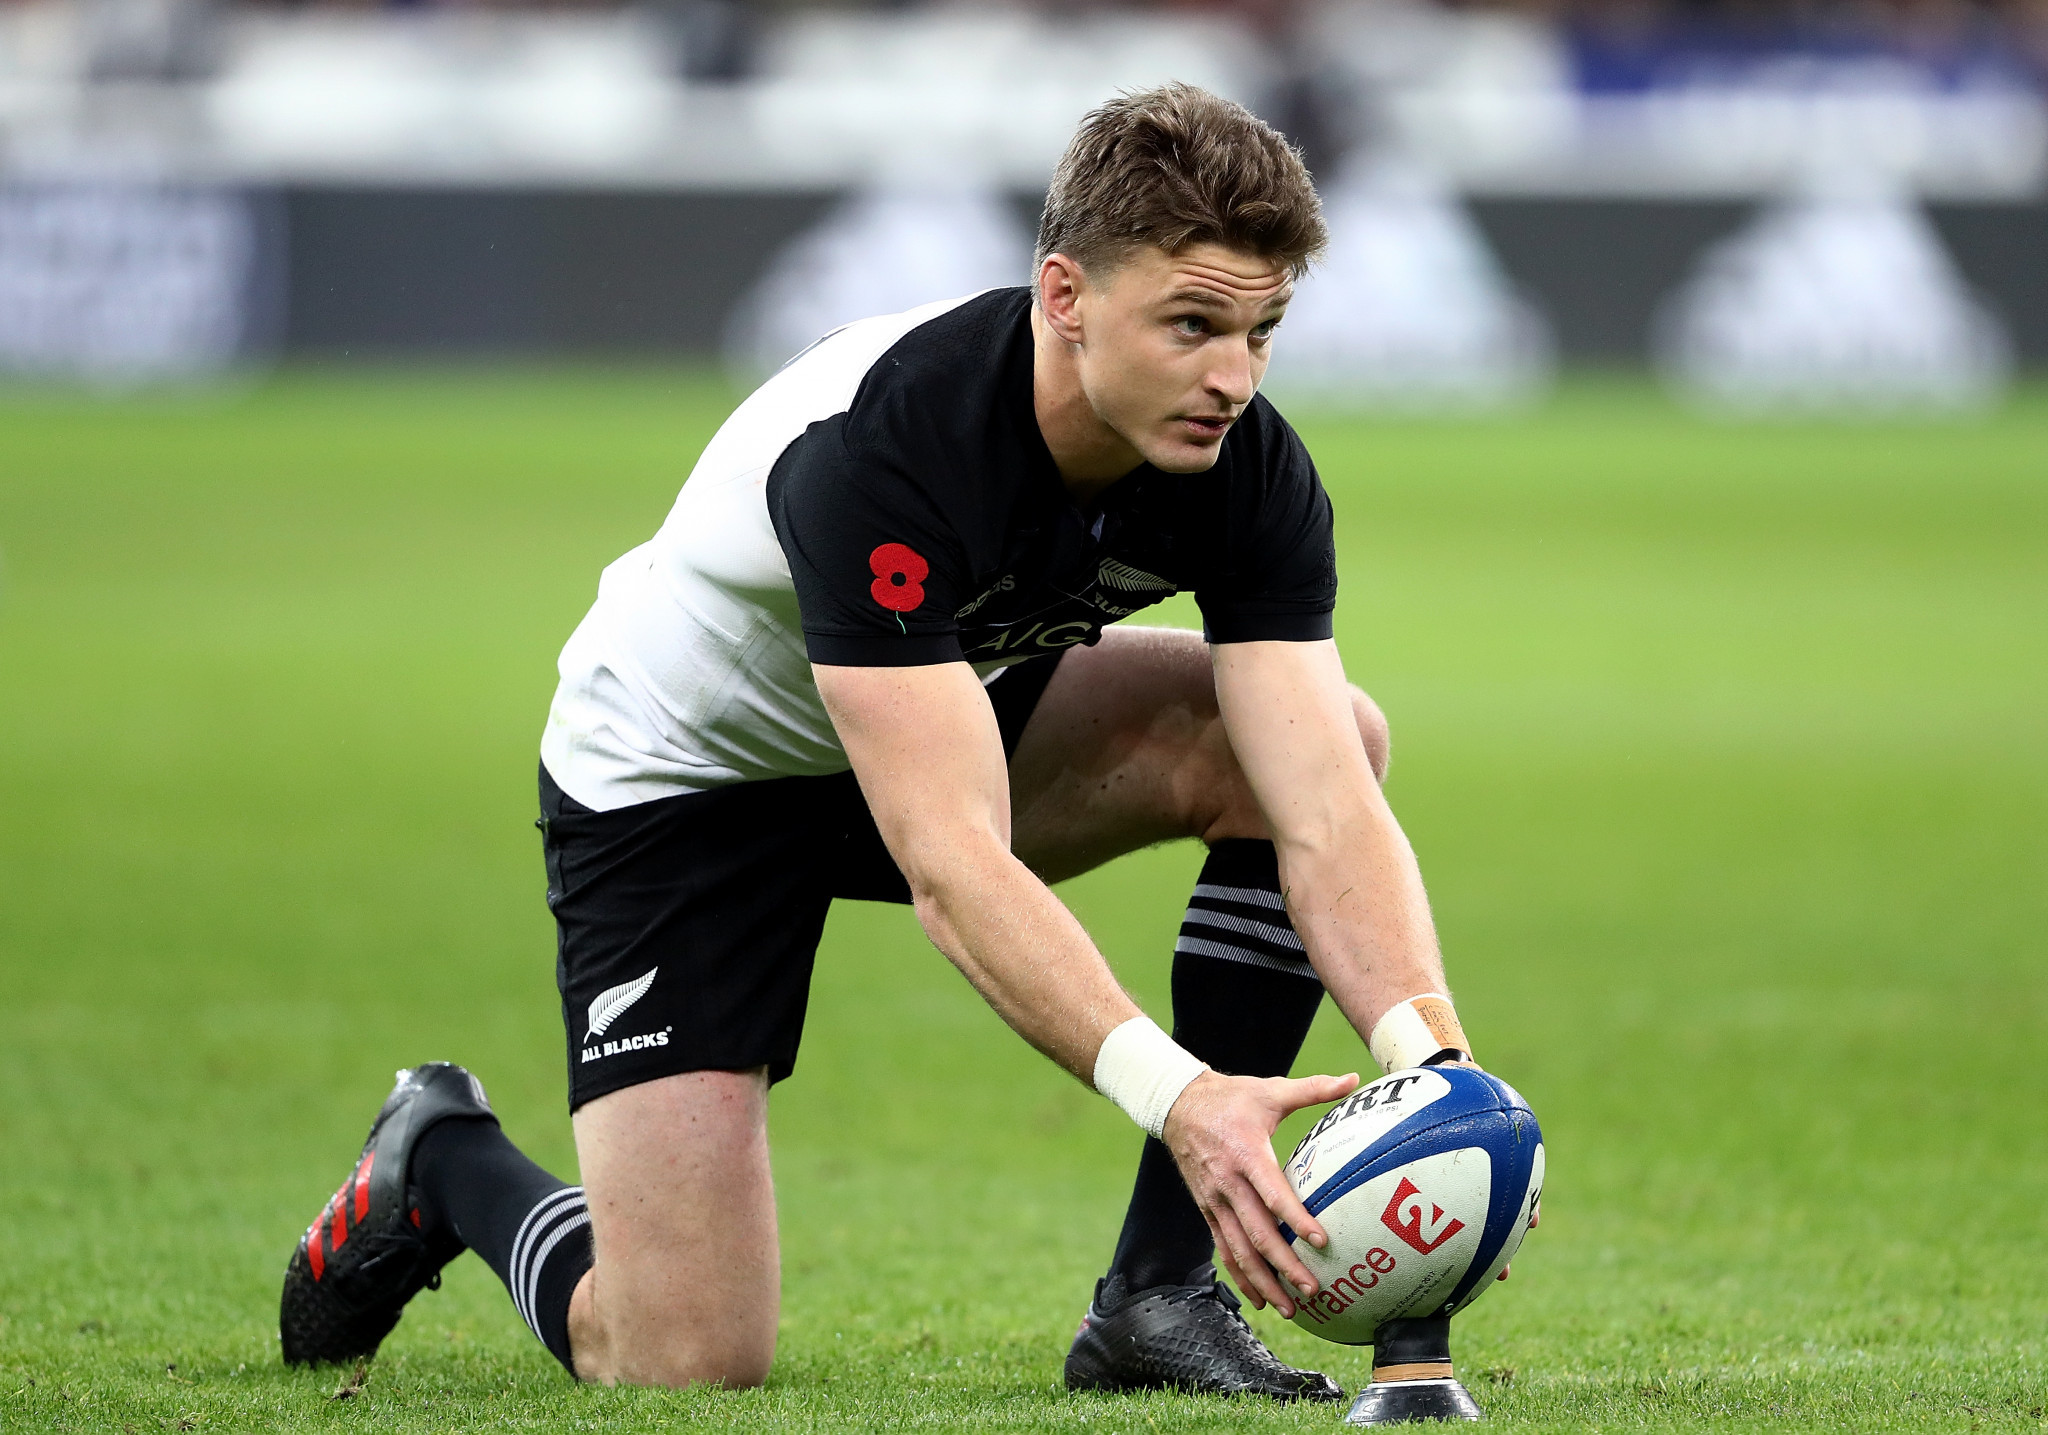 New Zealander Barrett in the frame again as World Rugby announce award nominees